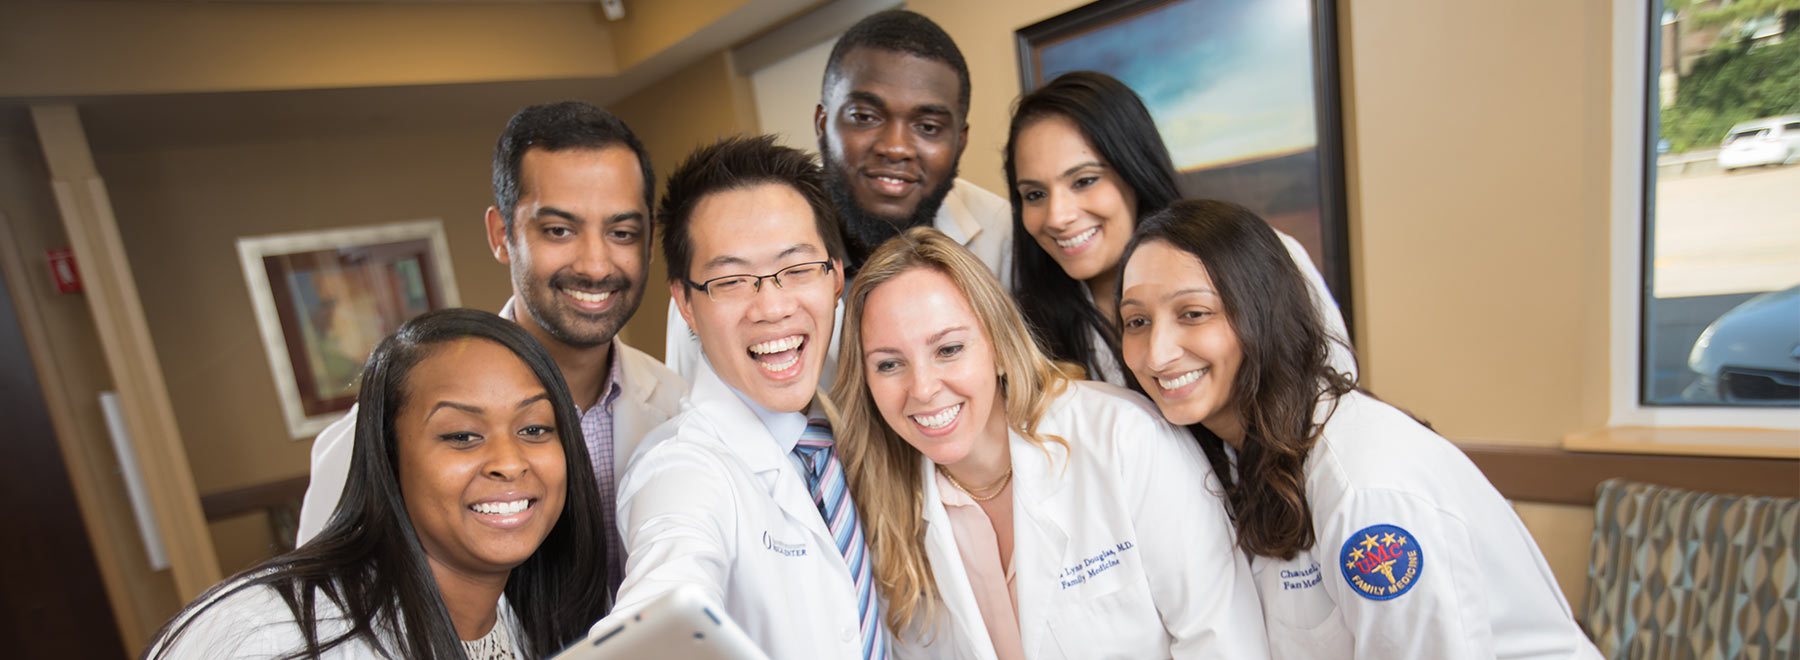 Group picture of seven family medicine doctors.